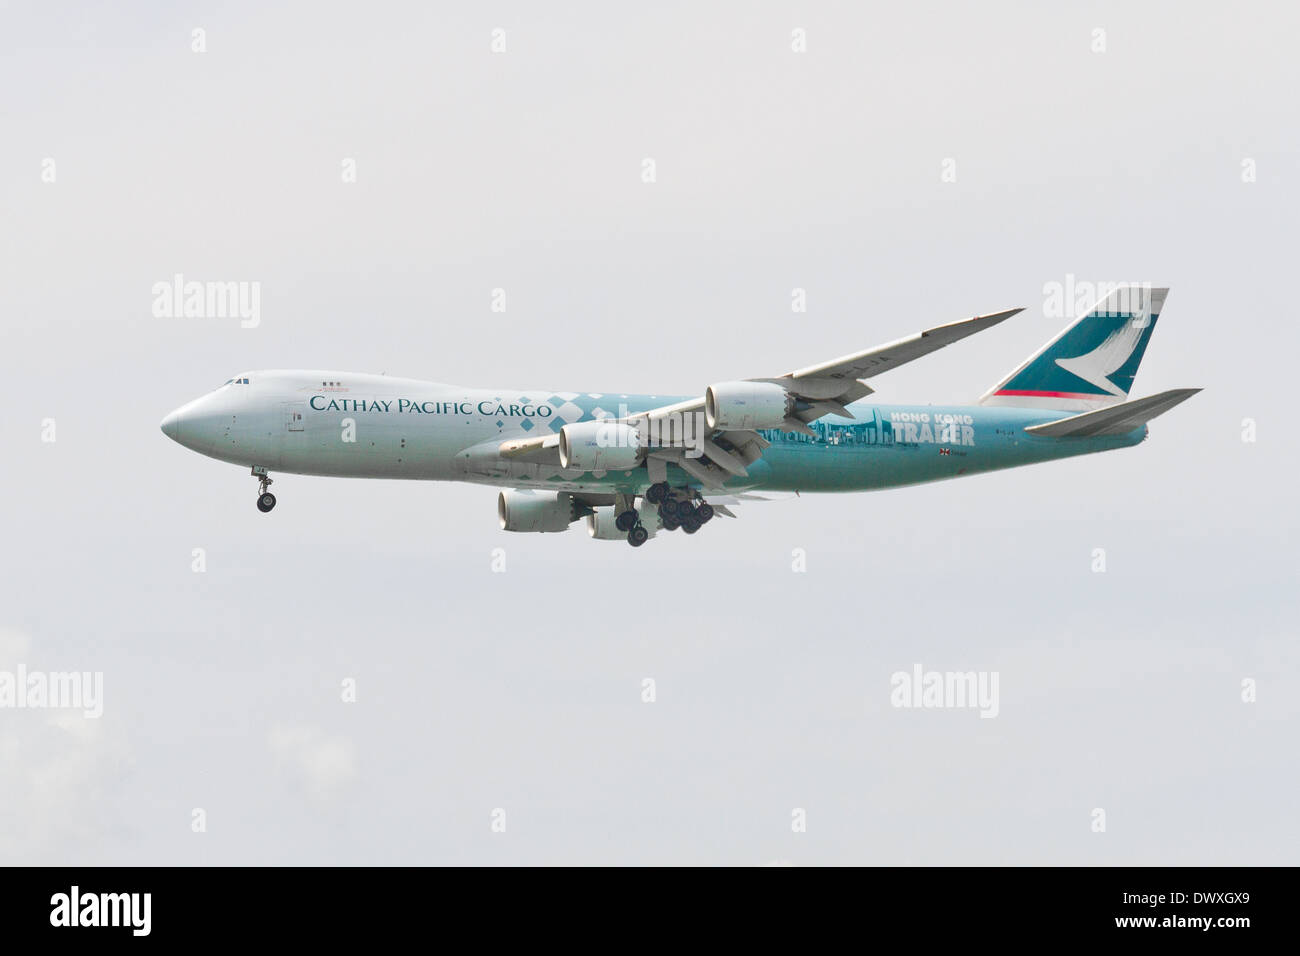 CX CATHAY PACIFIC CARGO Landing to HK Airport Stock Photo